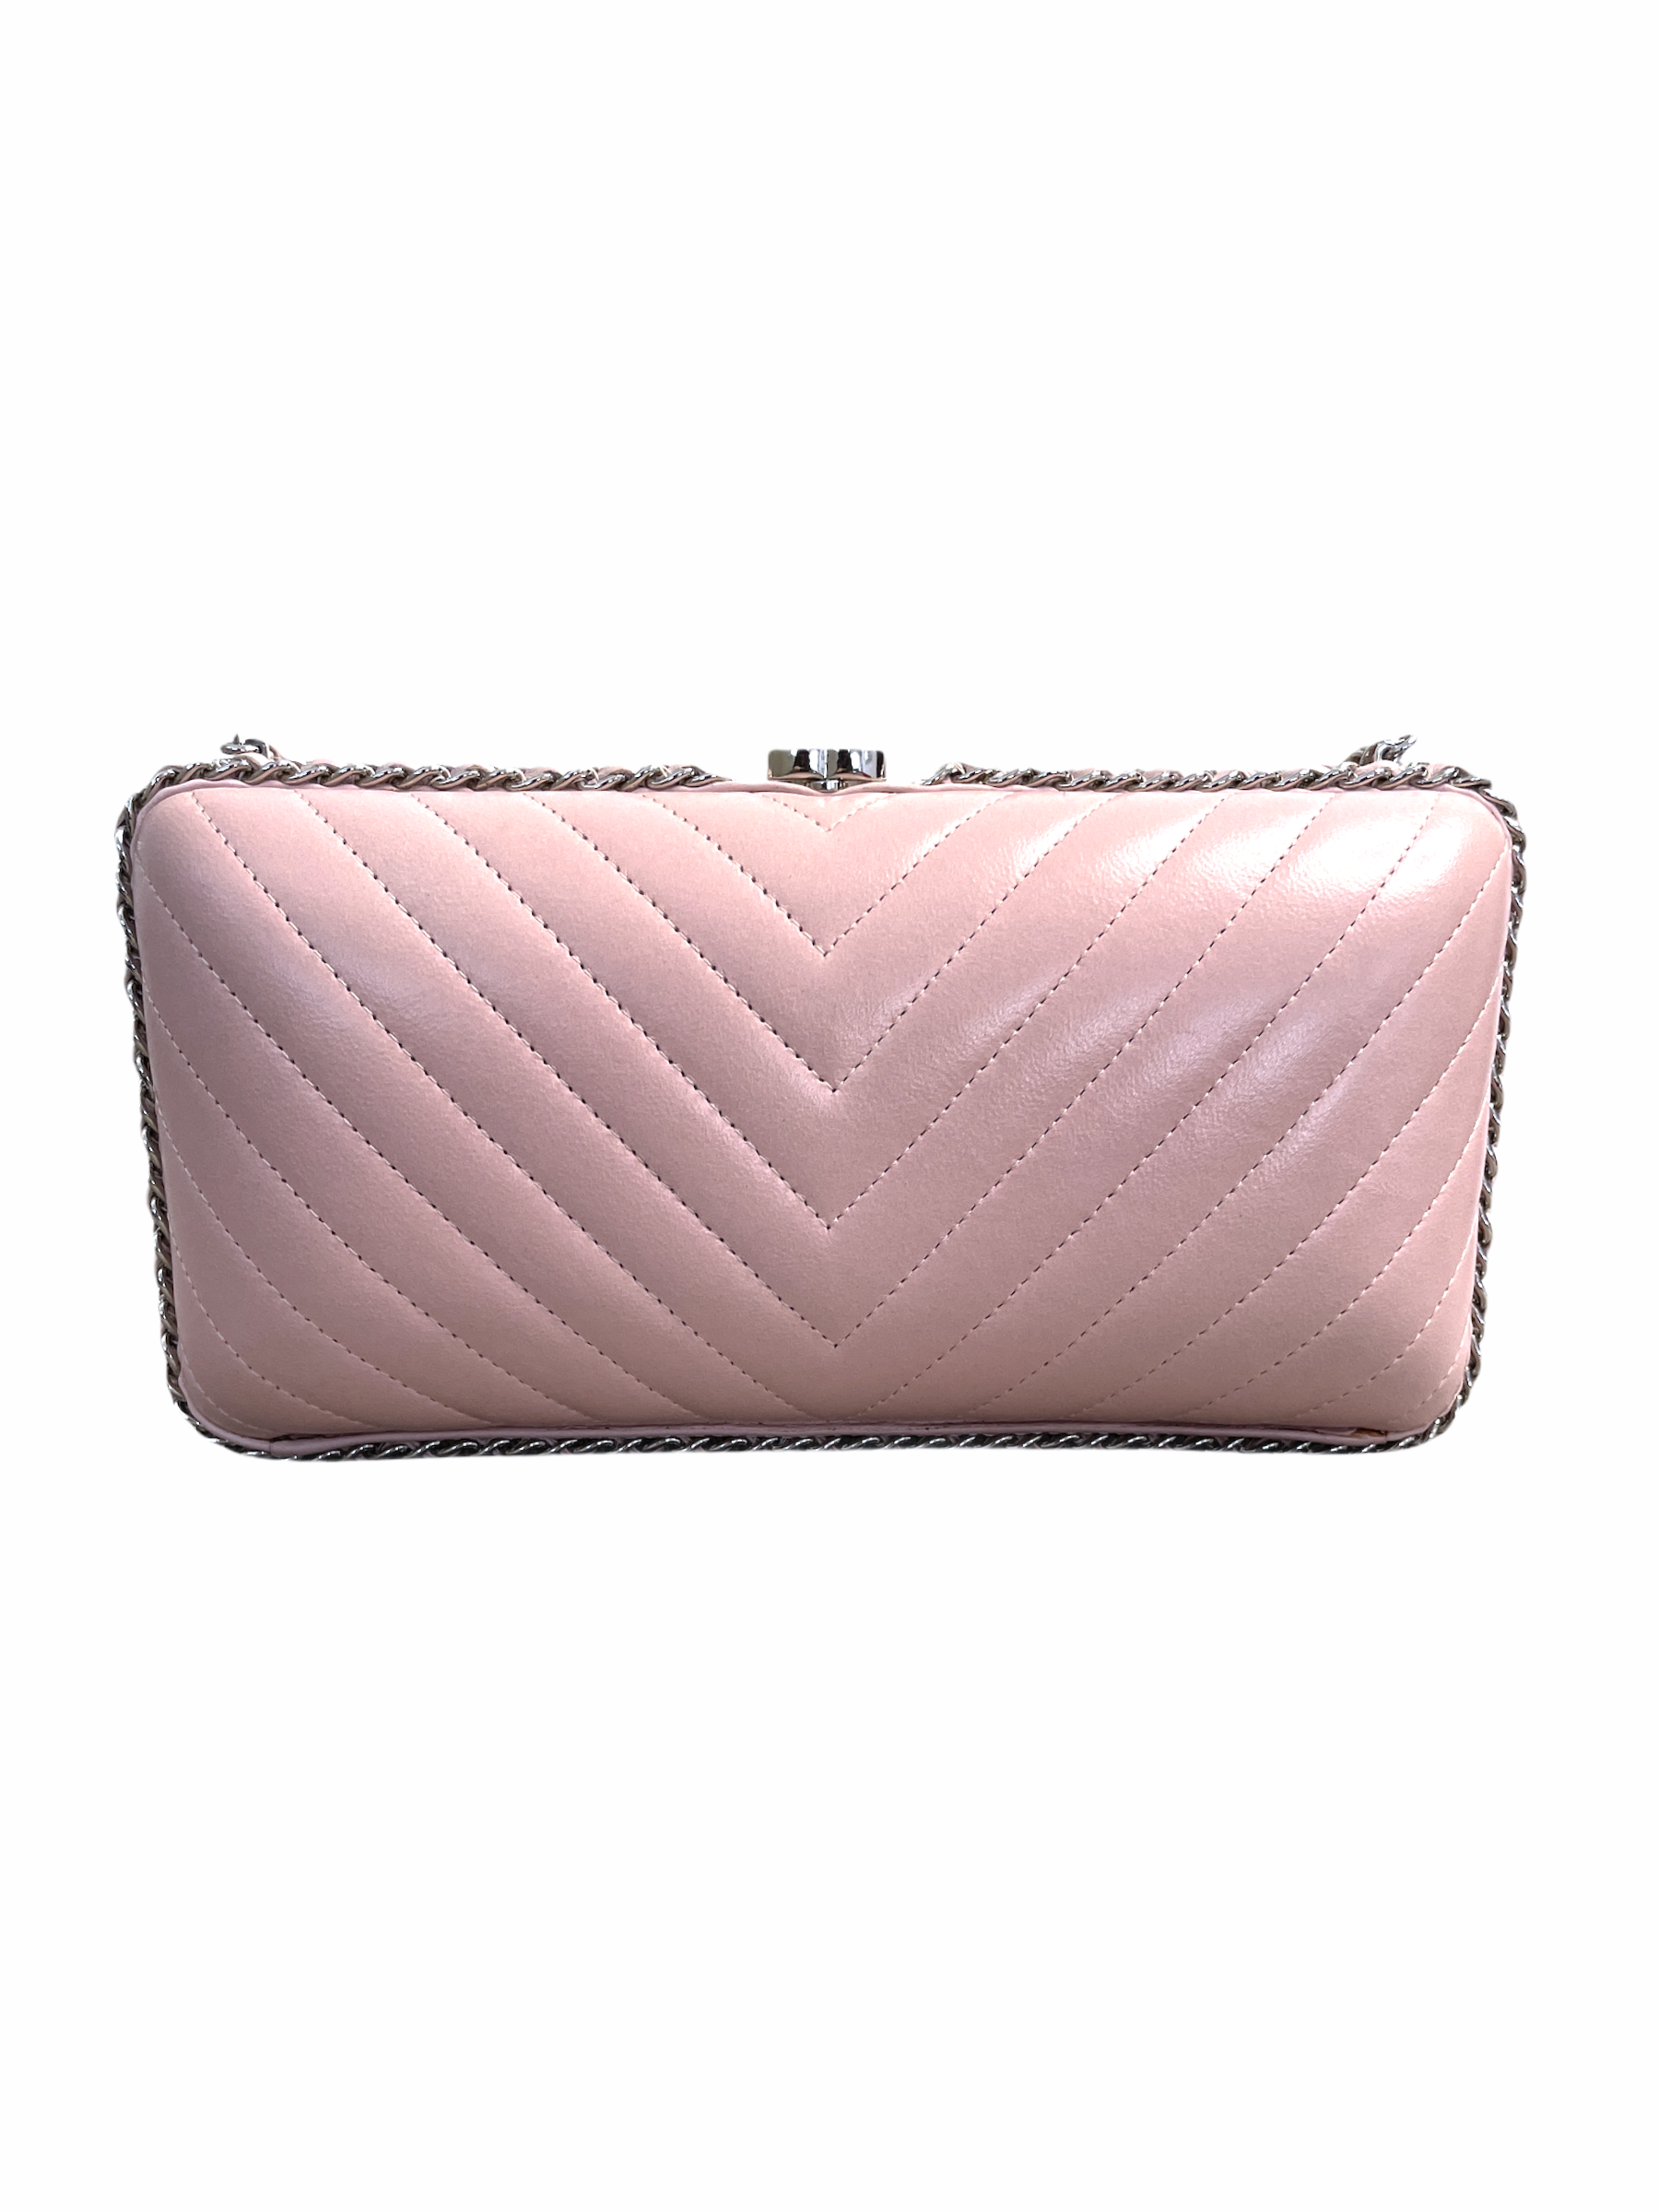 Pre Owned Chanel Pink Clutch | Perfect Condition